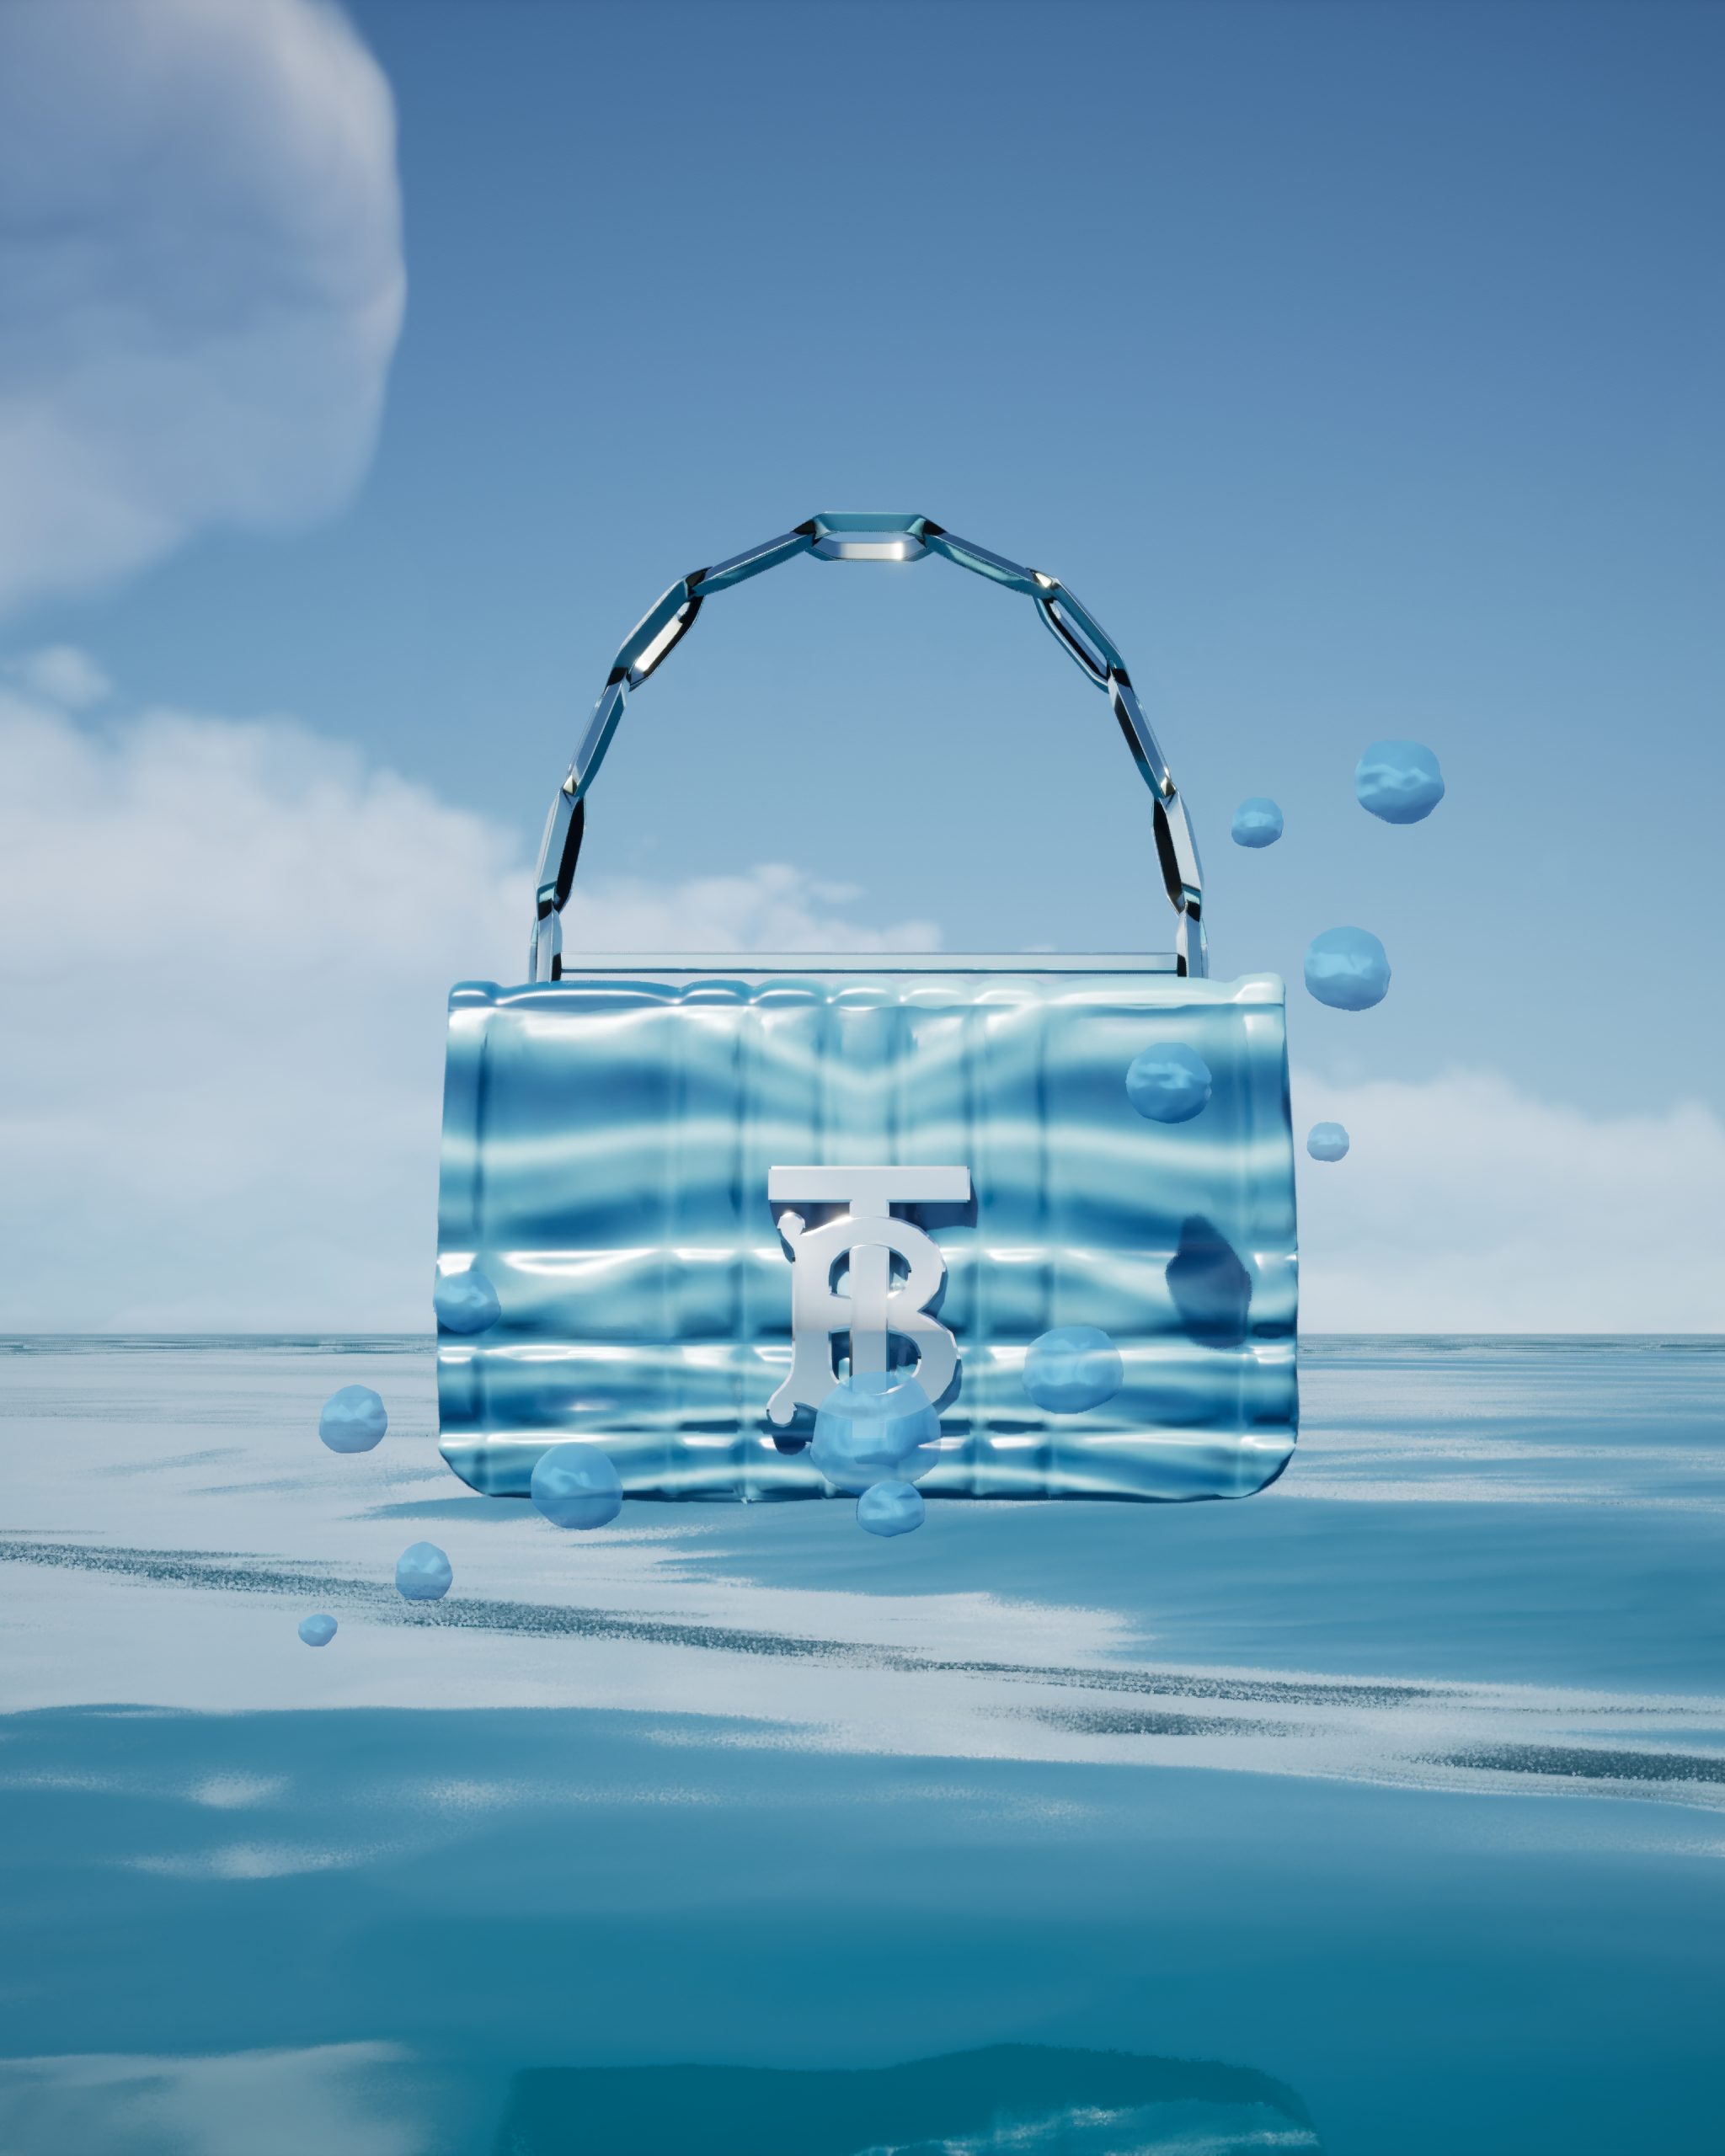 Burberry Introduces Virtual Handbag Collection on Roblox | The Impression